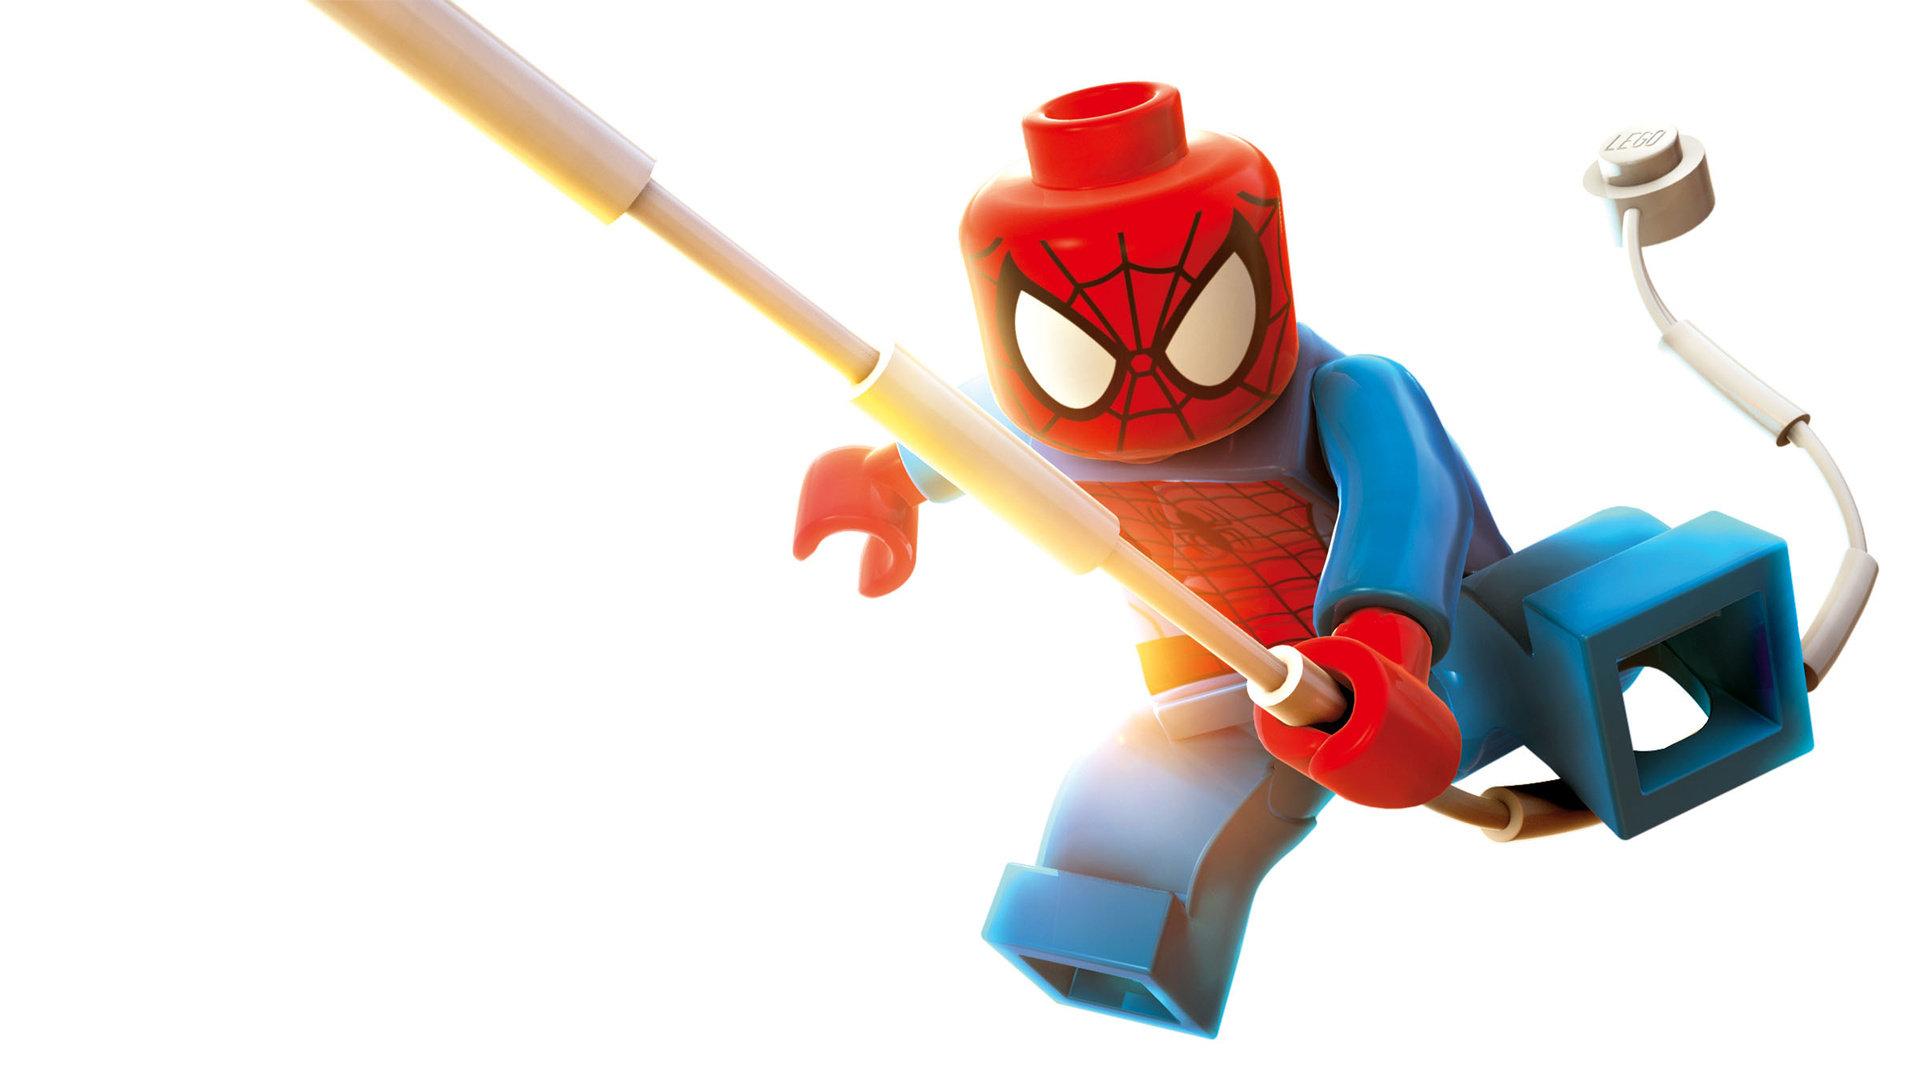 Lego Spiderman Wallpaper Lego Marvel Spiderman Cool. Lego Technic and Mindstorms